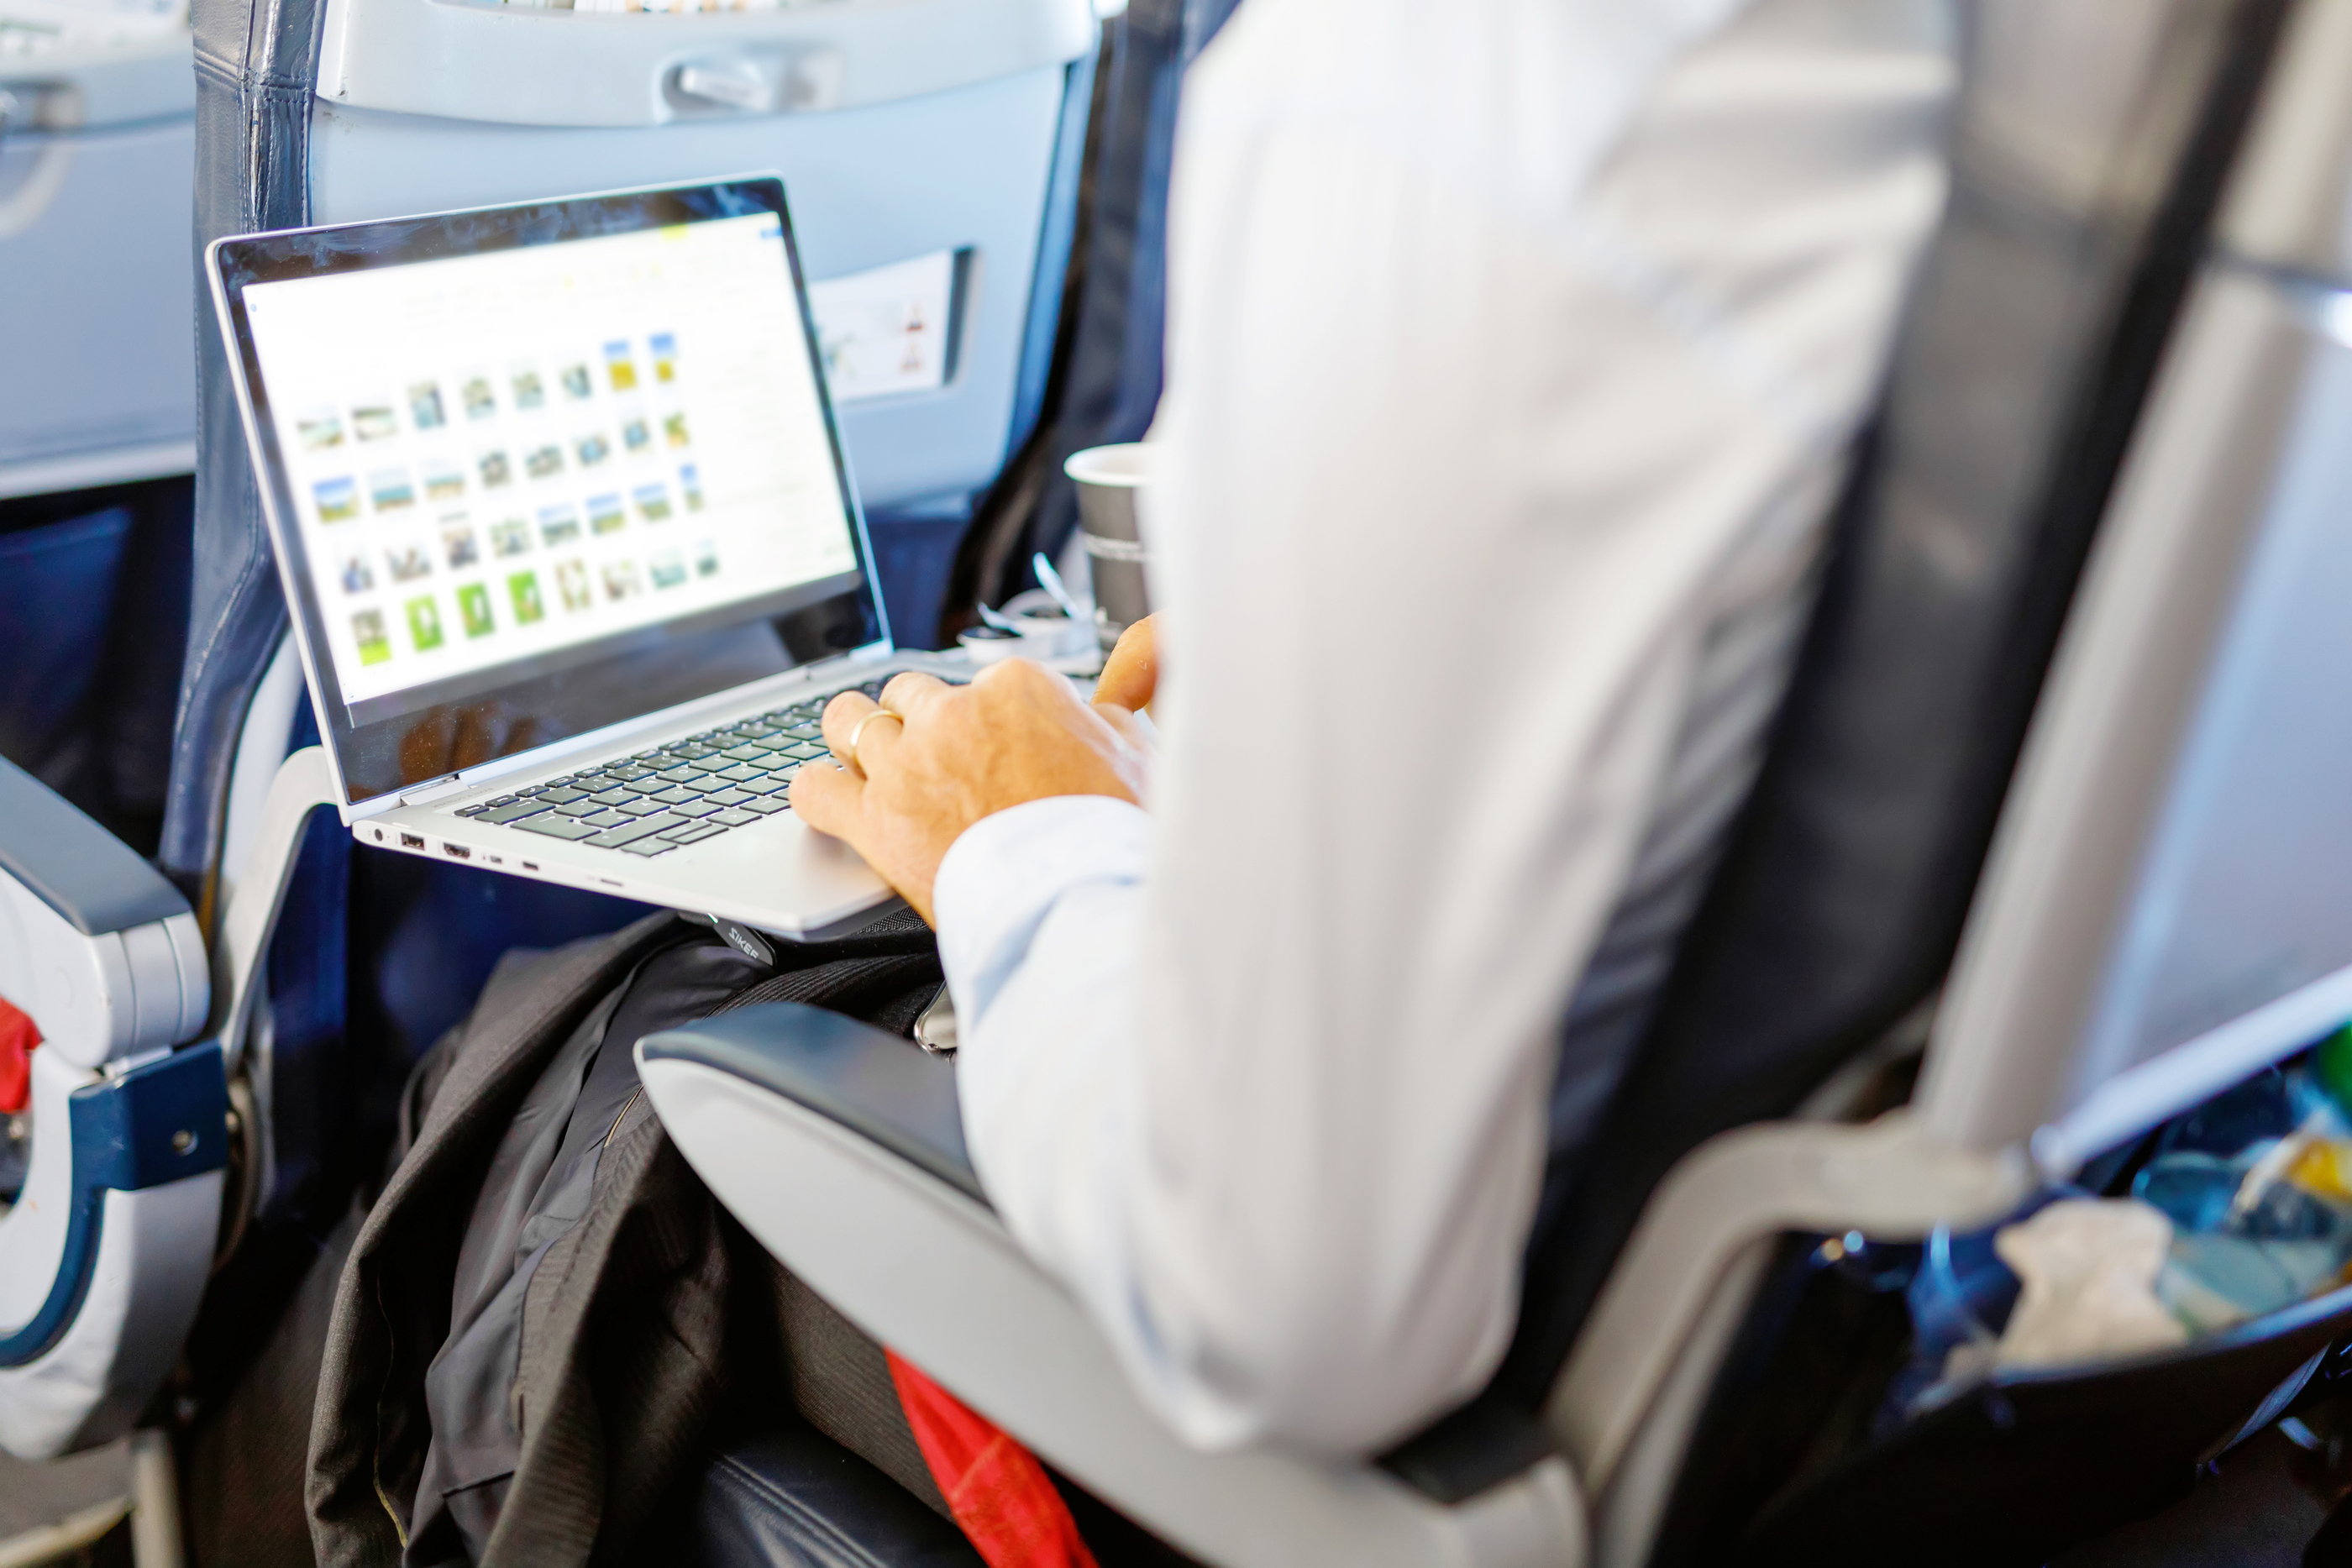 a person sitting in an airplane using a laptop